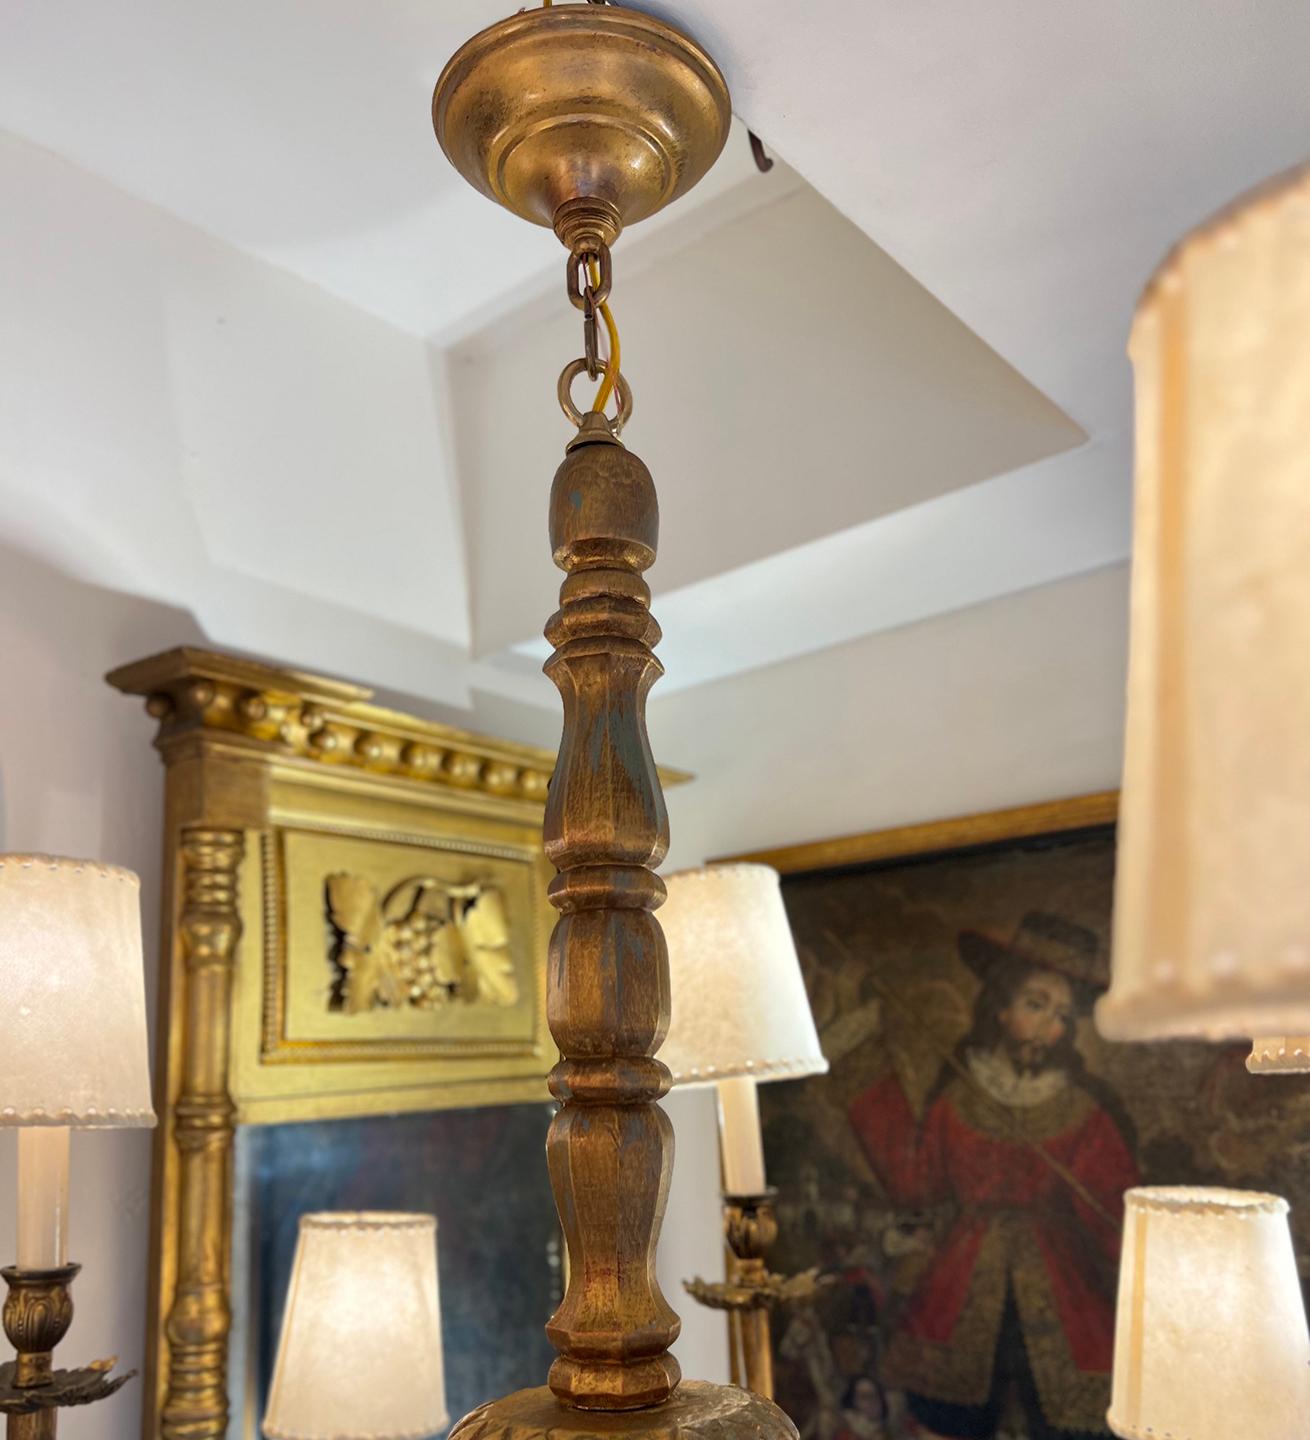 Pair of circa 1930's Italian carved and gilt wood chandeliers with 10 lights. Sold Individually.

Measurements:
Present drop: 40